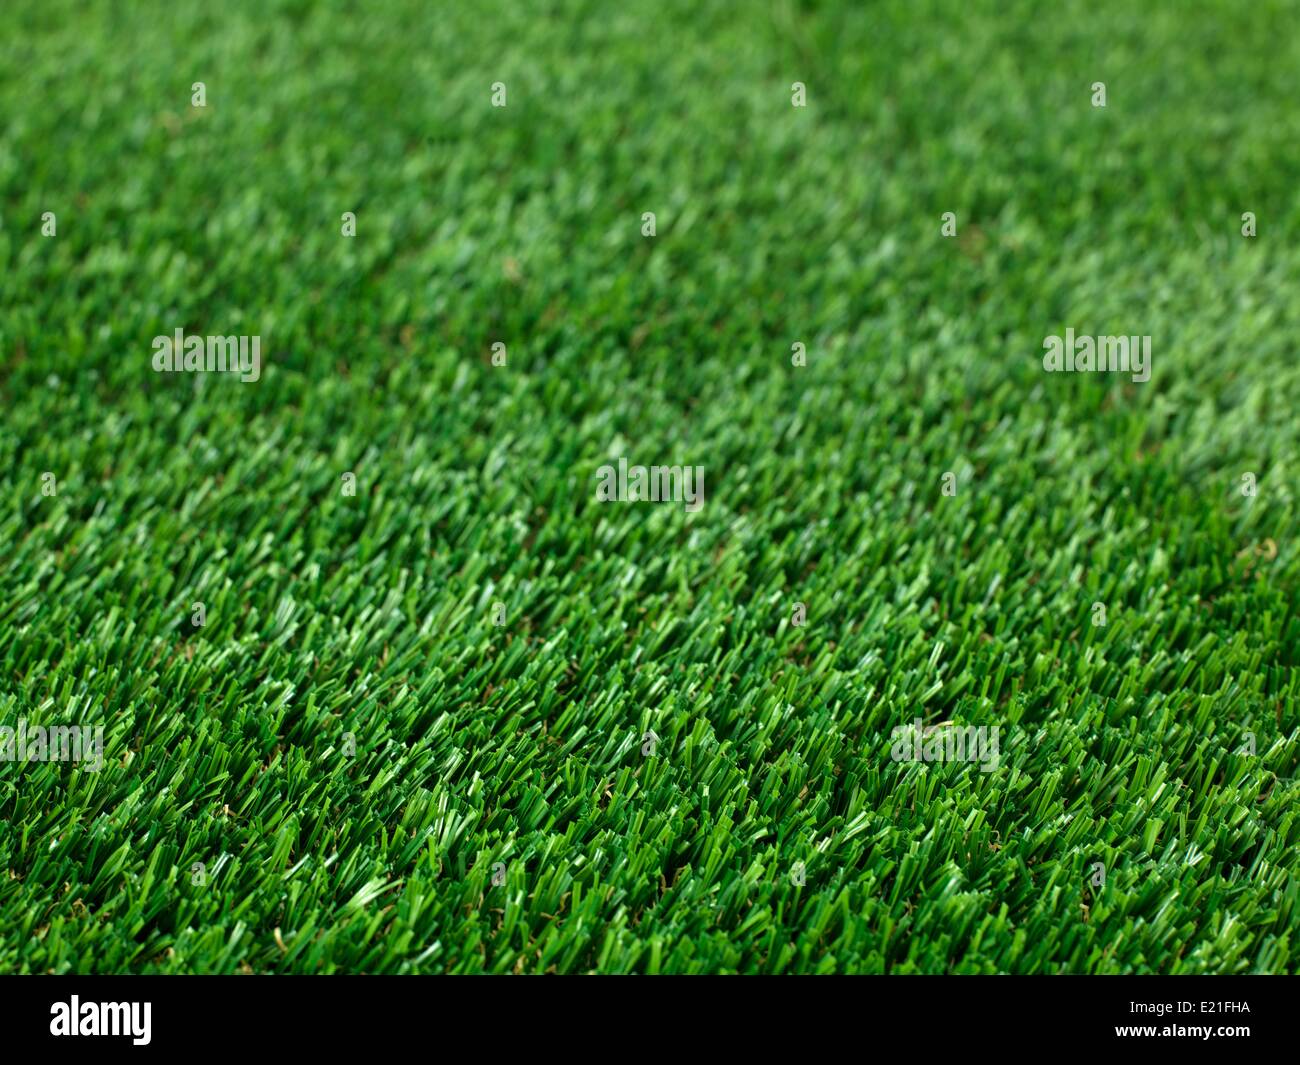 A close up image of artificle grass Stock Photo